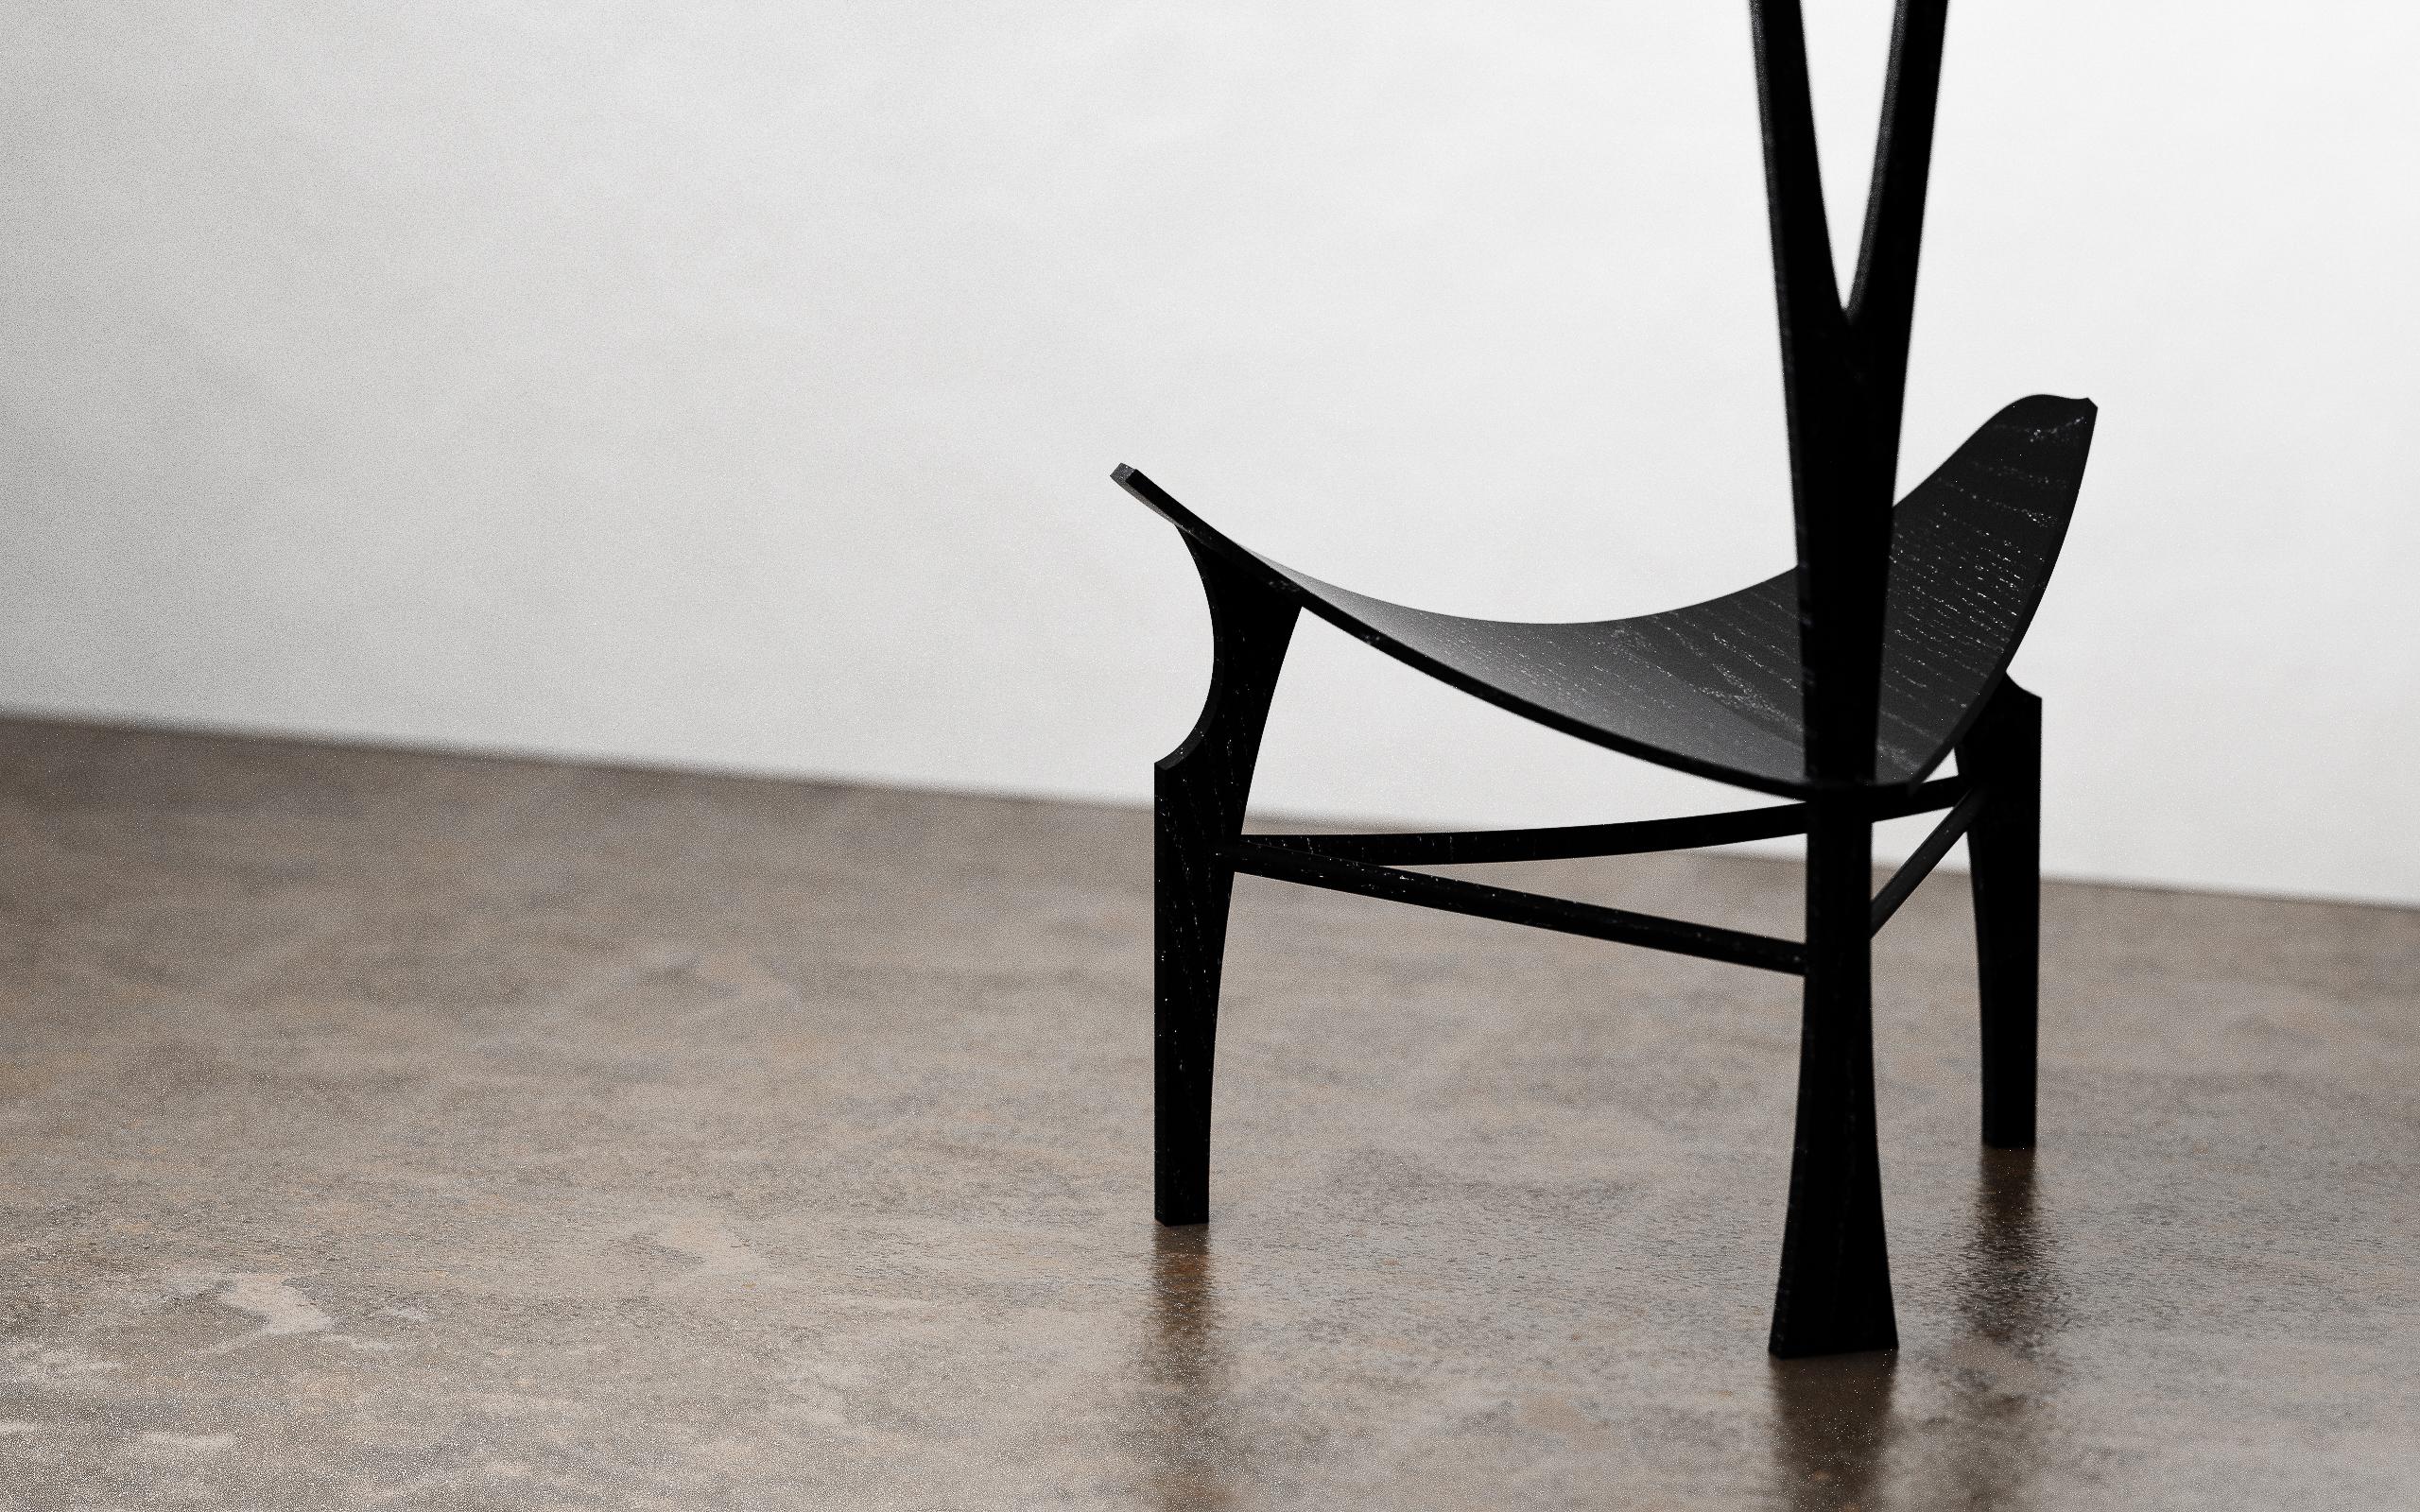 The Vil dining chair by Christopher Mark is a hand crafted piece made from white ash. The chair is avilable for single or multiple orders. The minimalist design of the chair was created to accentuate any table paired with it. The finish is a black